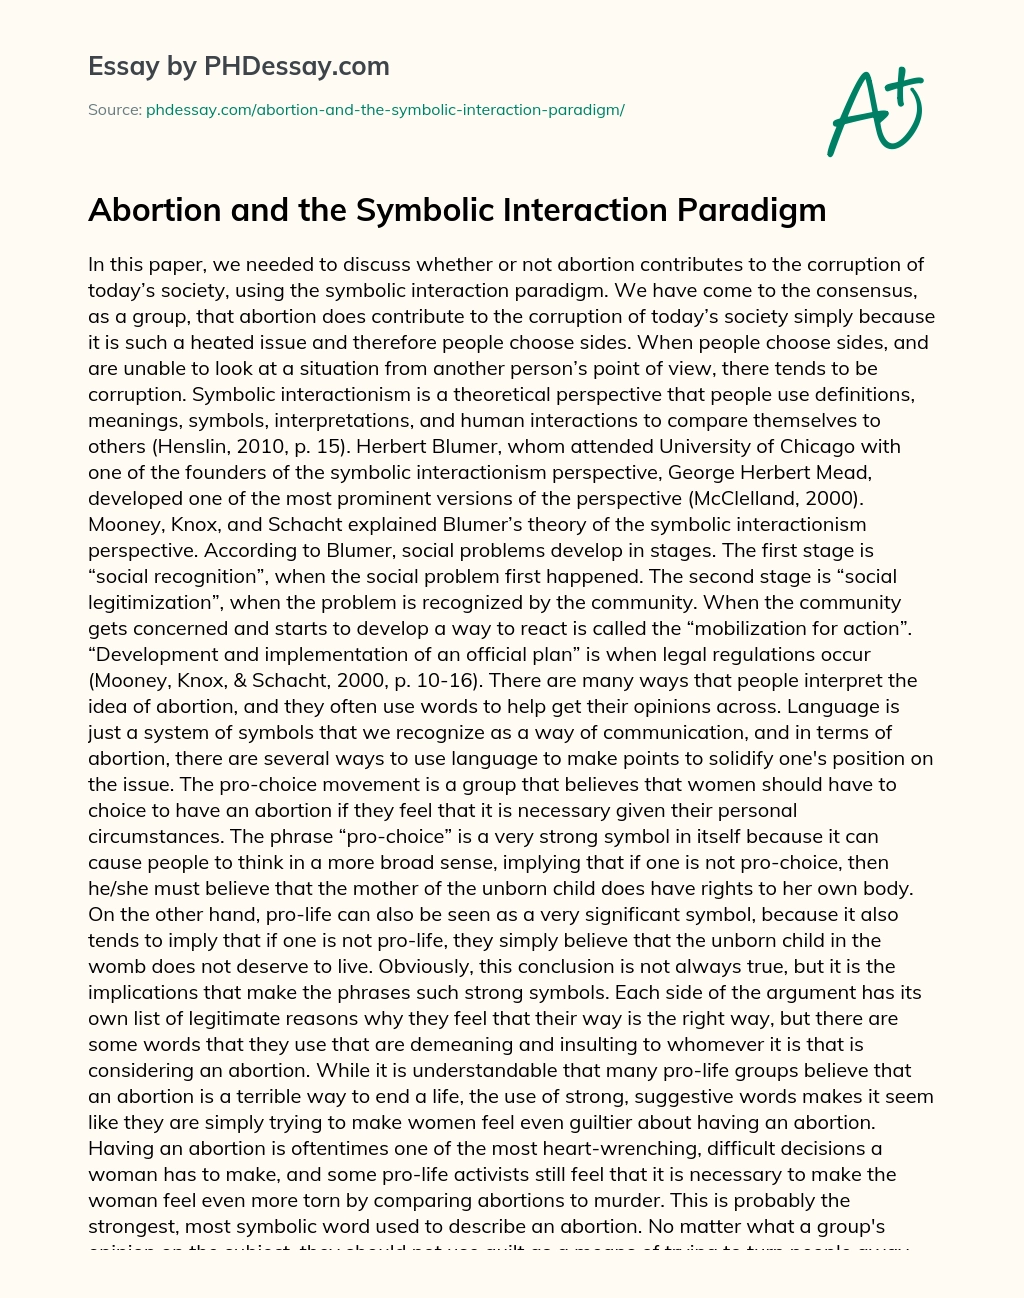 Abortion and the Symbolic Interaction Paradigm essay